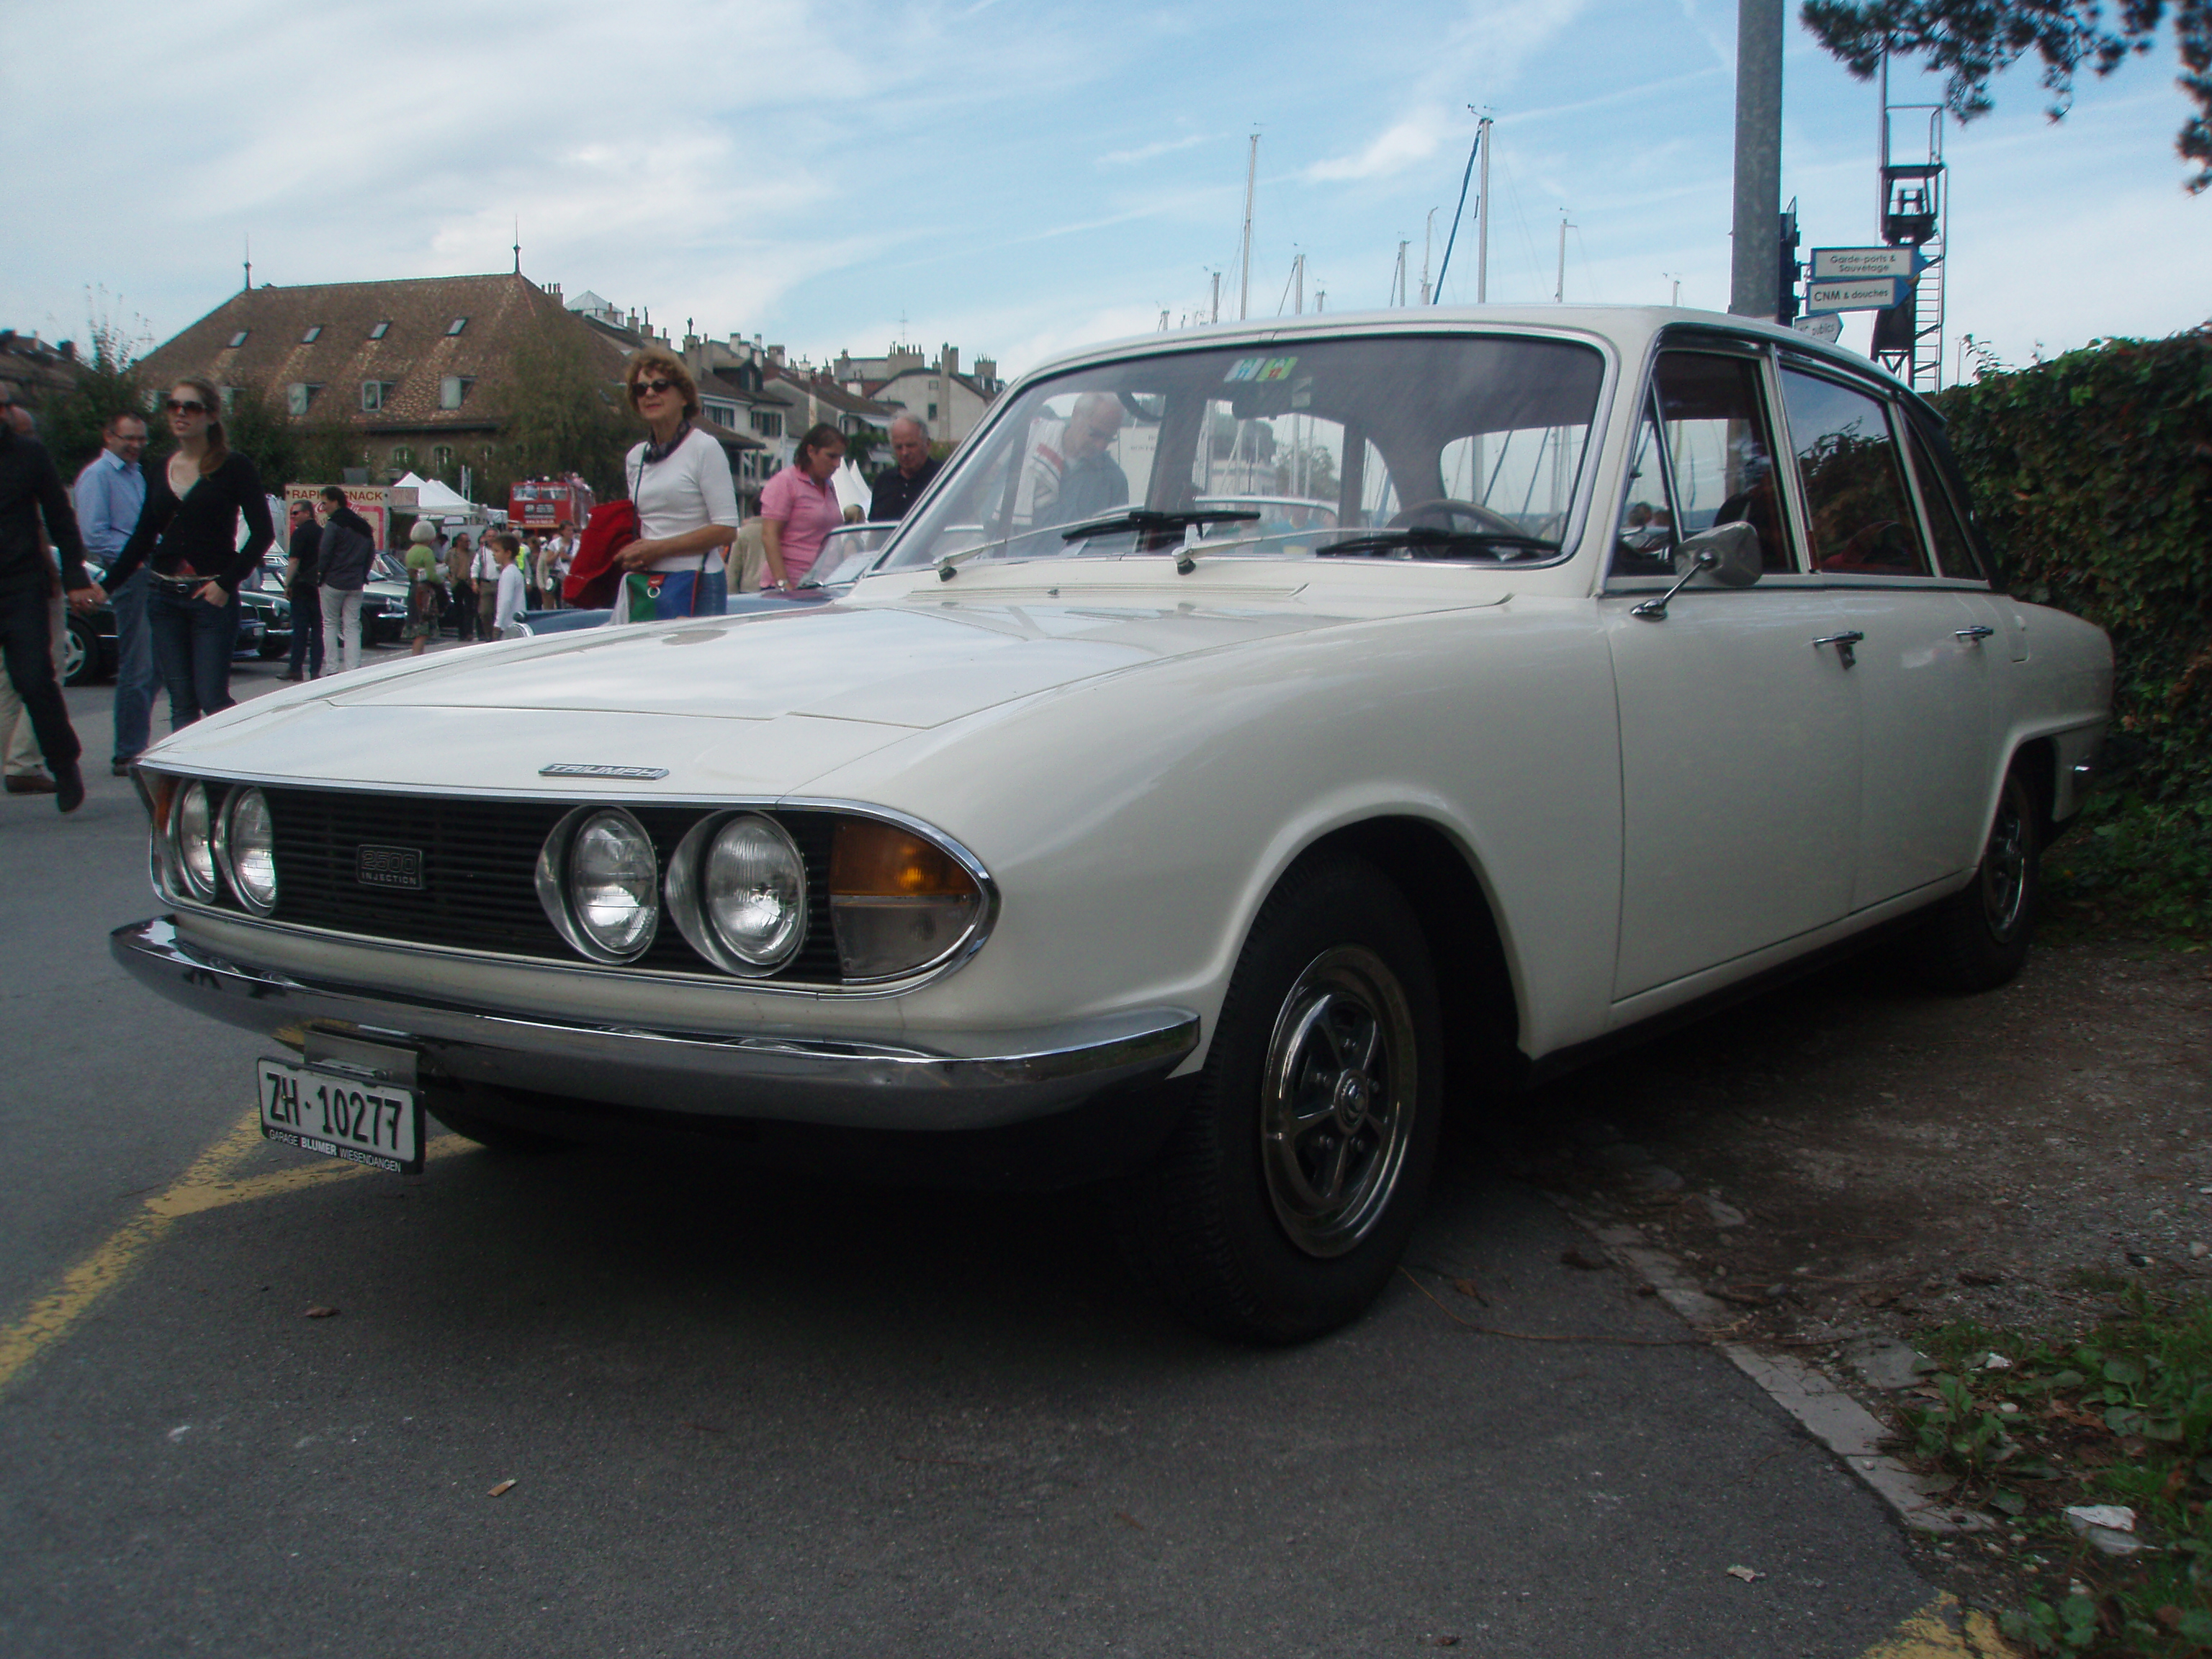 File:Triumph 2500 Injection in Morges 2012 - 2.JPG - Wikimedia Commons